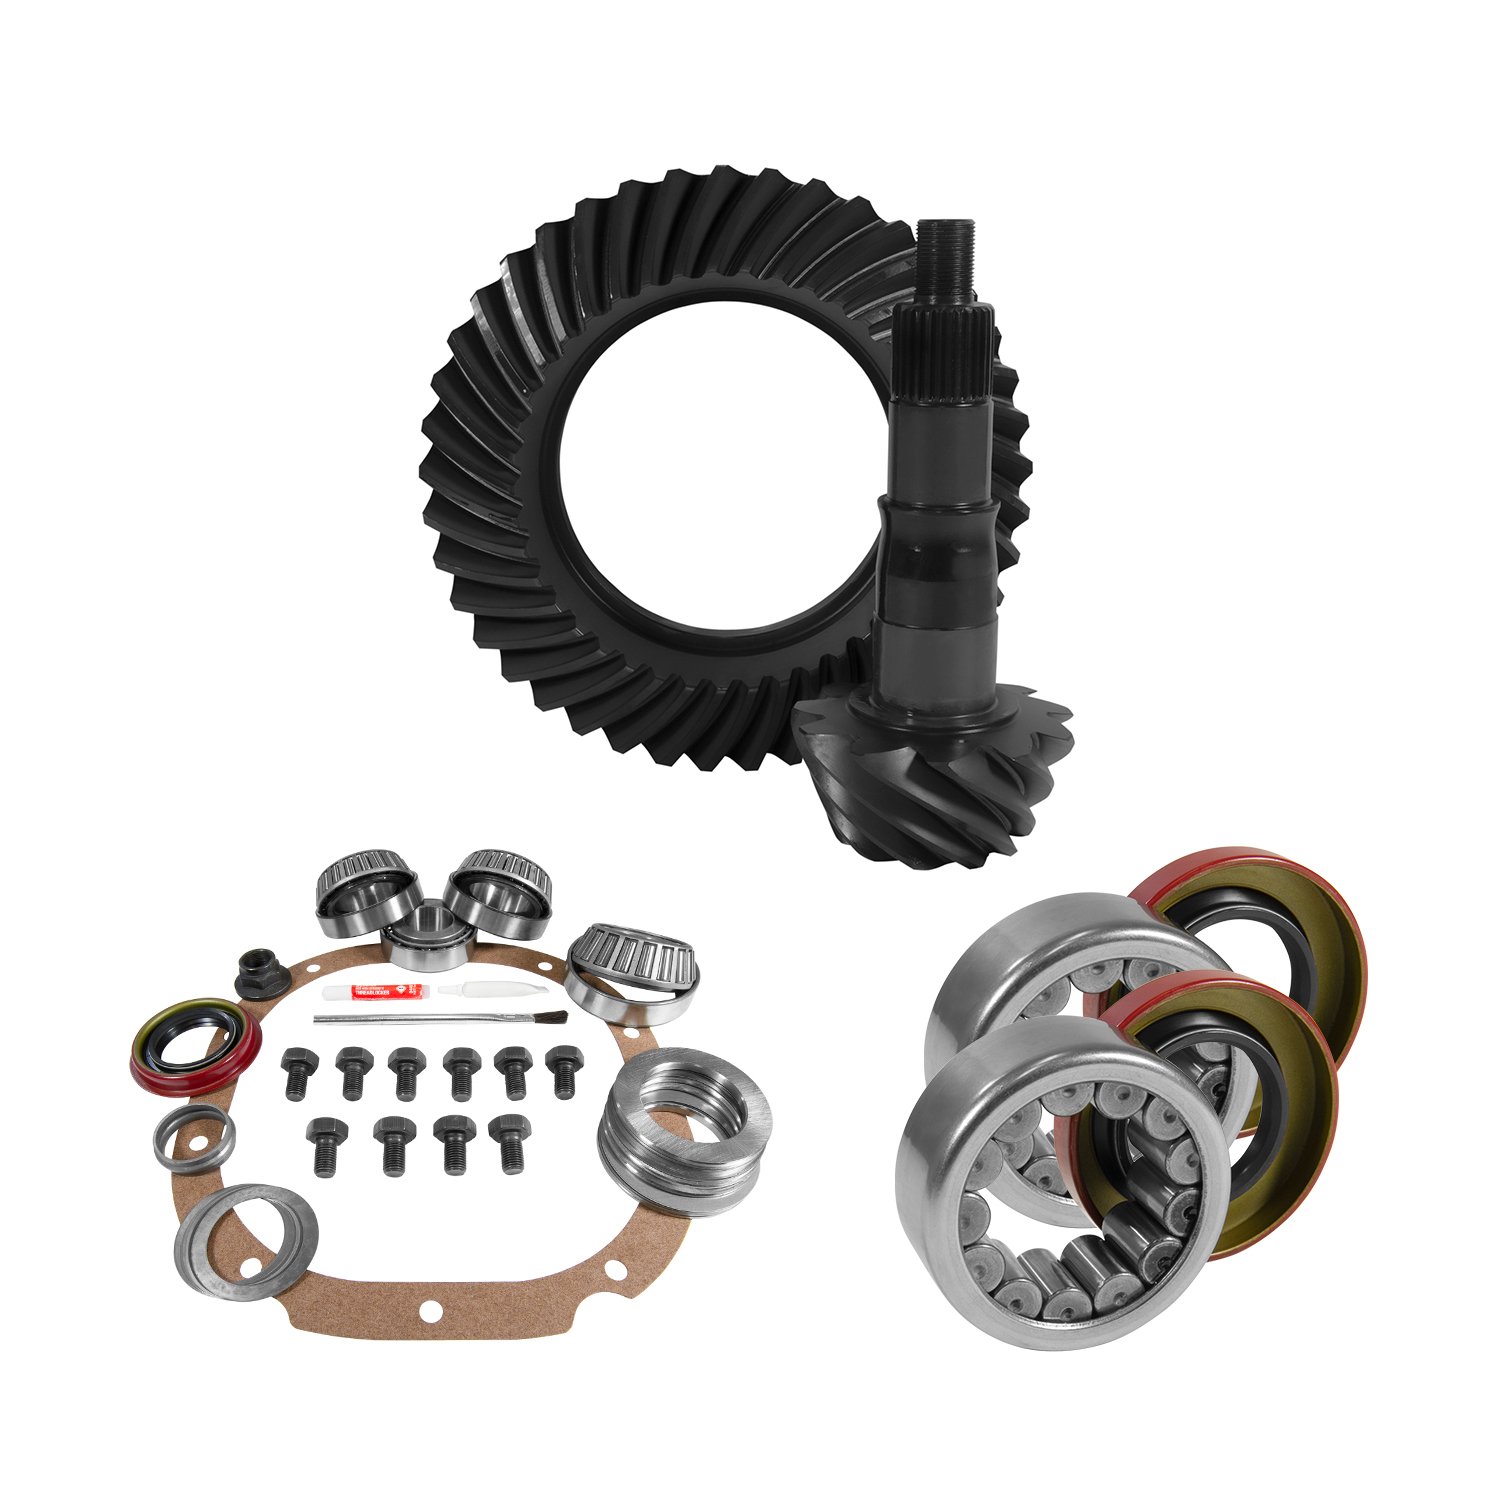 USA Standard 10778 8.8 in. Ford 4.11 Rear Ring & Pinion Install Kit, 2.99 in. Od Axle Bearings & Seals